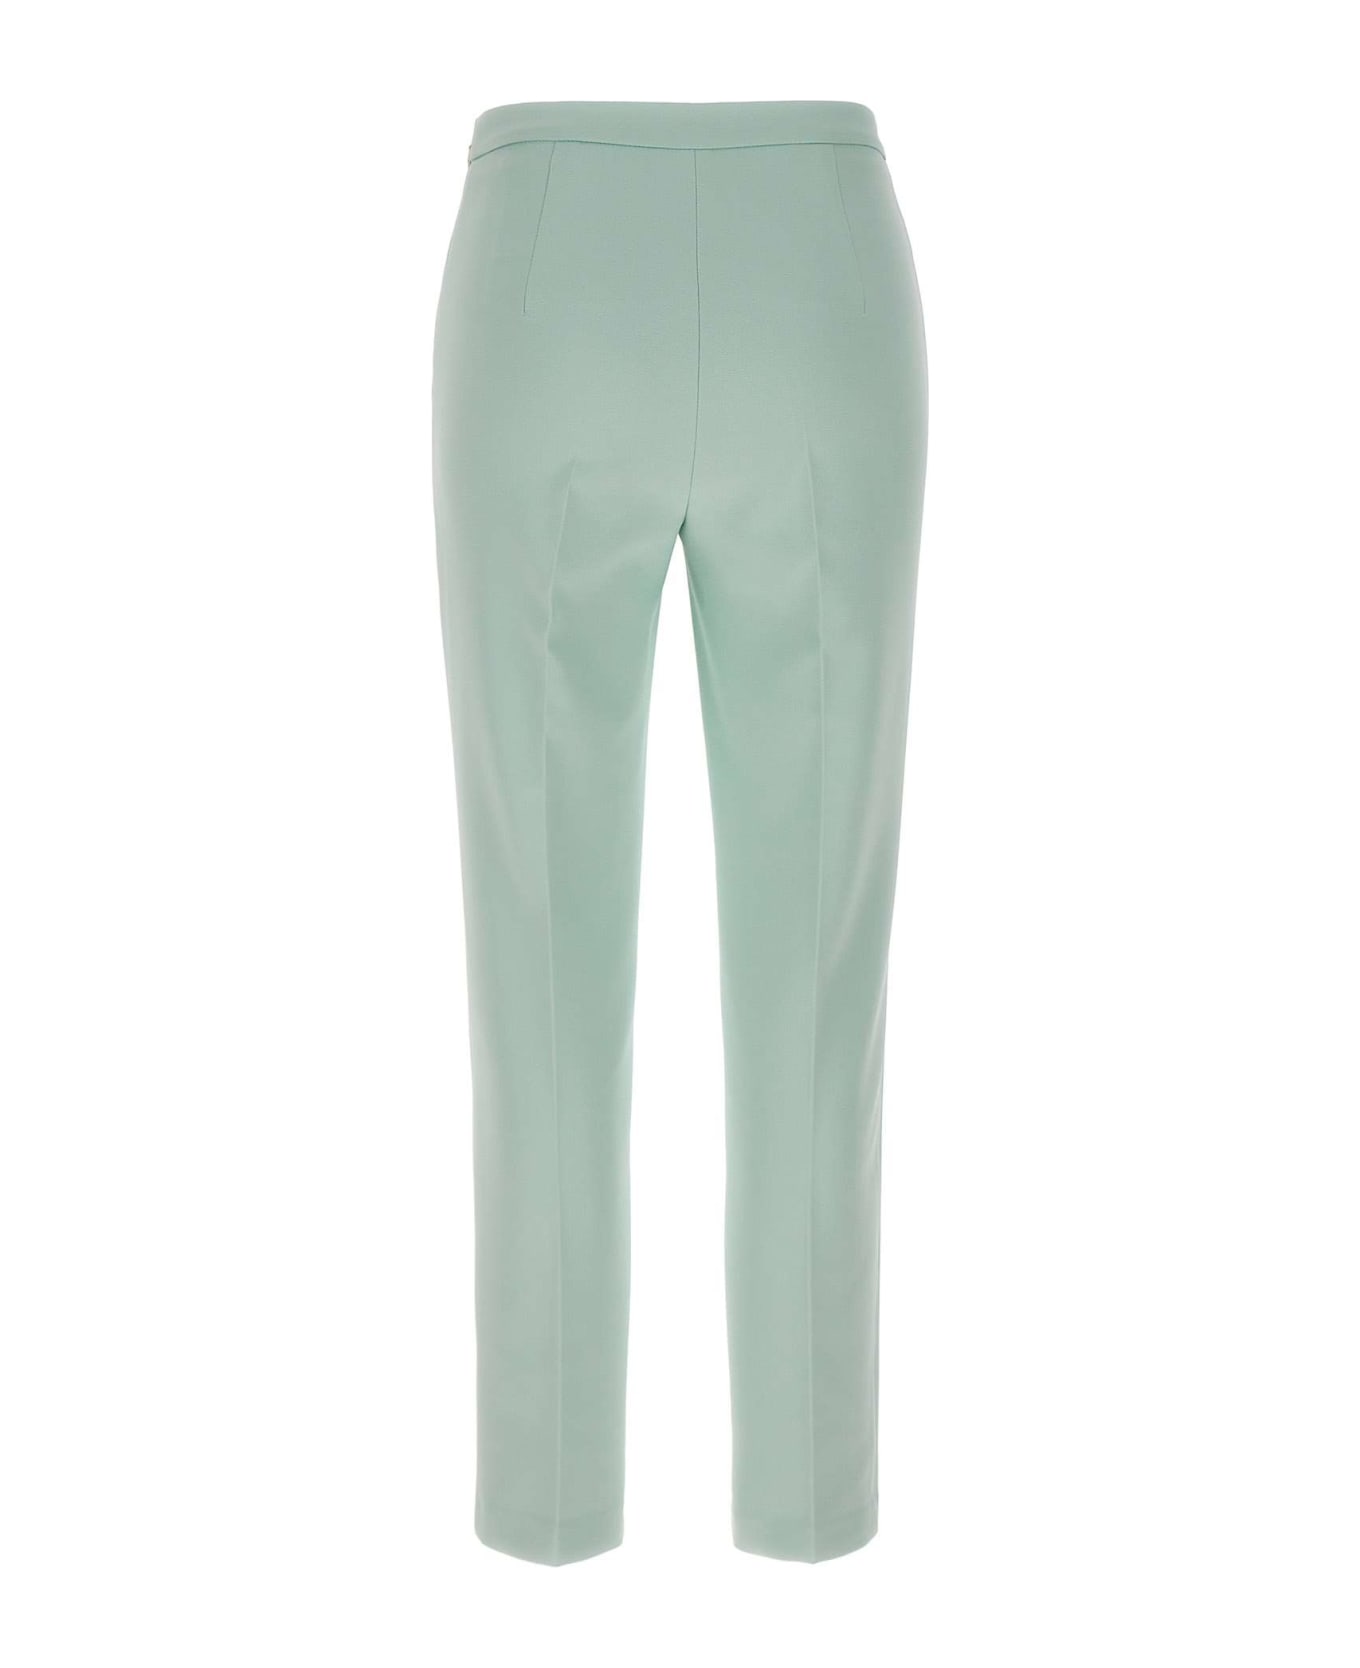 Elisabetta Franchi 'daily' Trousers - GREEN ボトムス